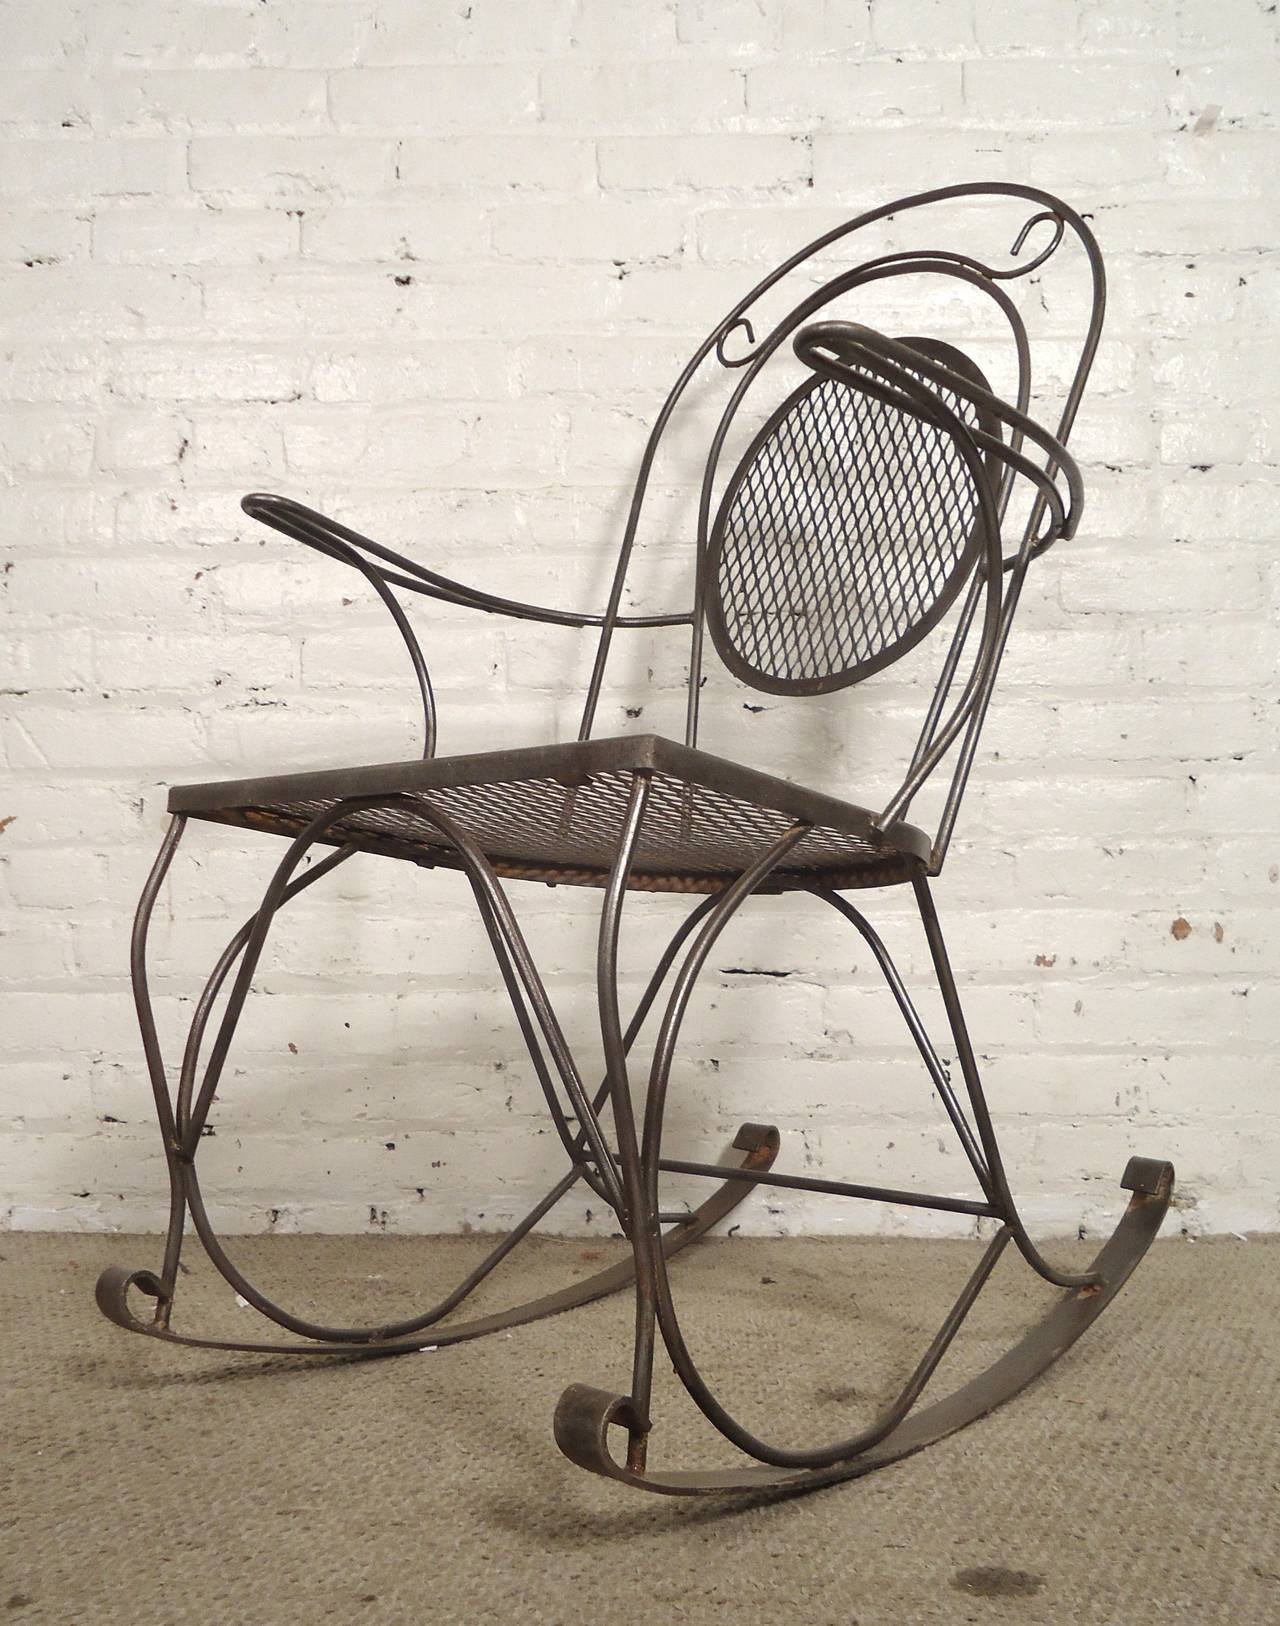 Vintage rocker with scrolling detail. Mesh seat and back, curling arms and legs. All stripped down and restored to a bare metal style finish.

(Please confirm item location - NY or NJ - with dealer)